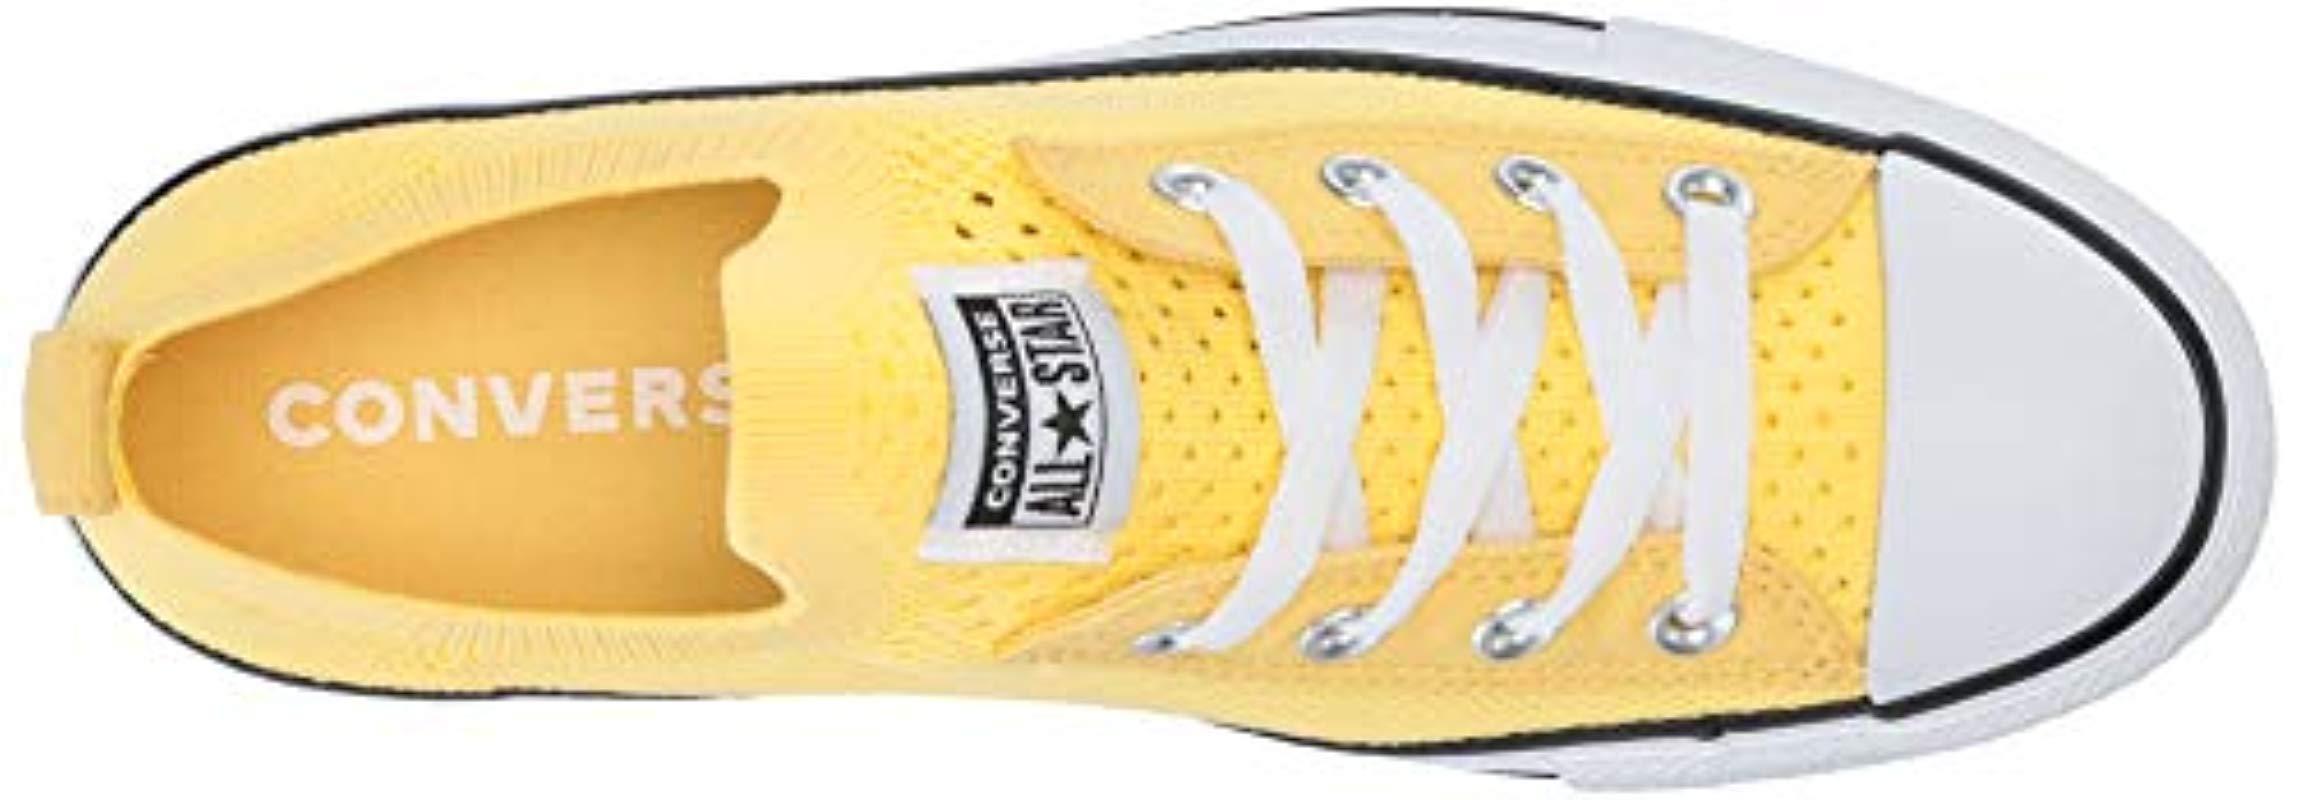 Converse Chuck Taylor Knit Slip On Sneakers Yellow Lyst